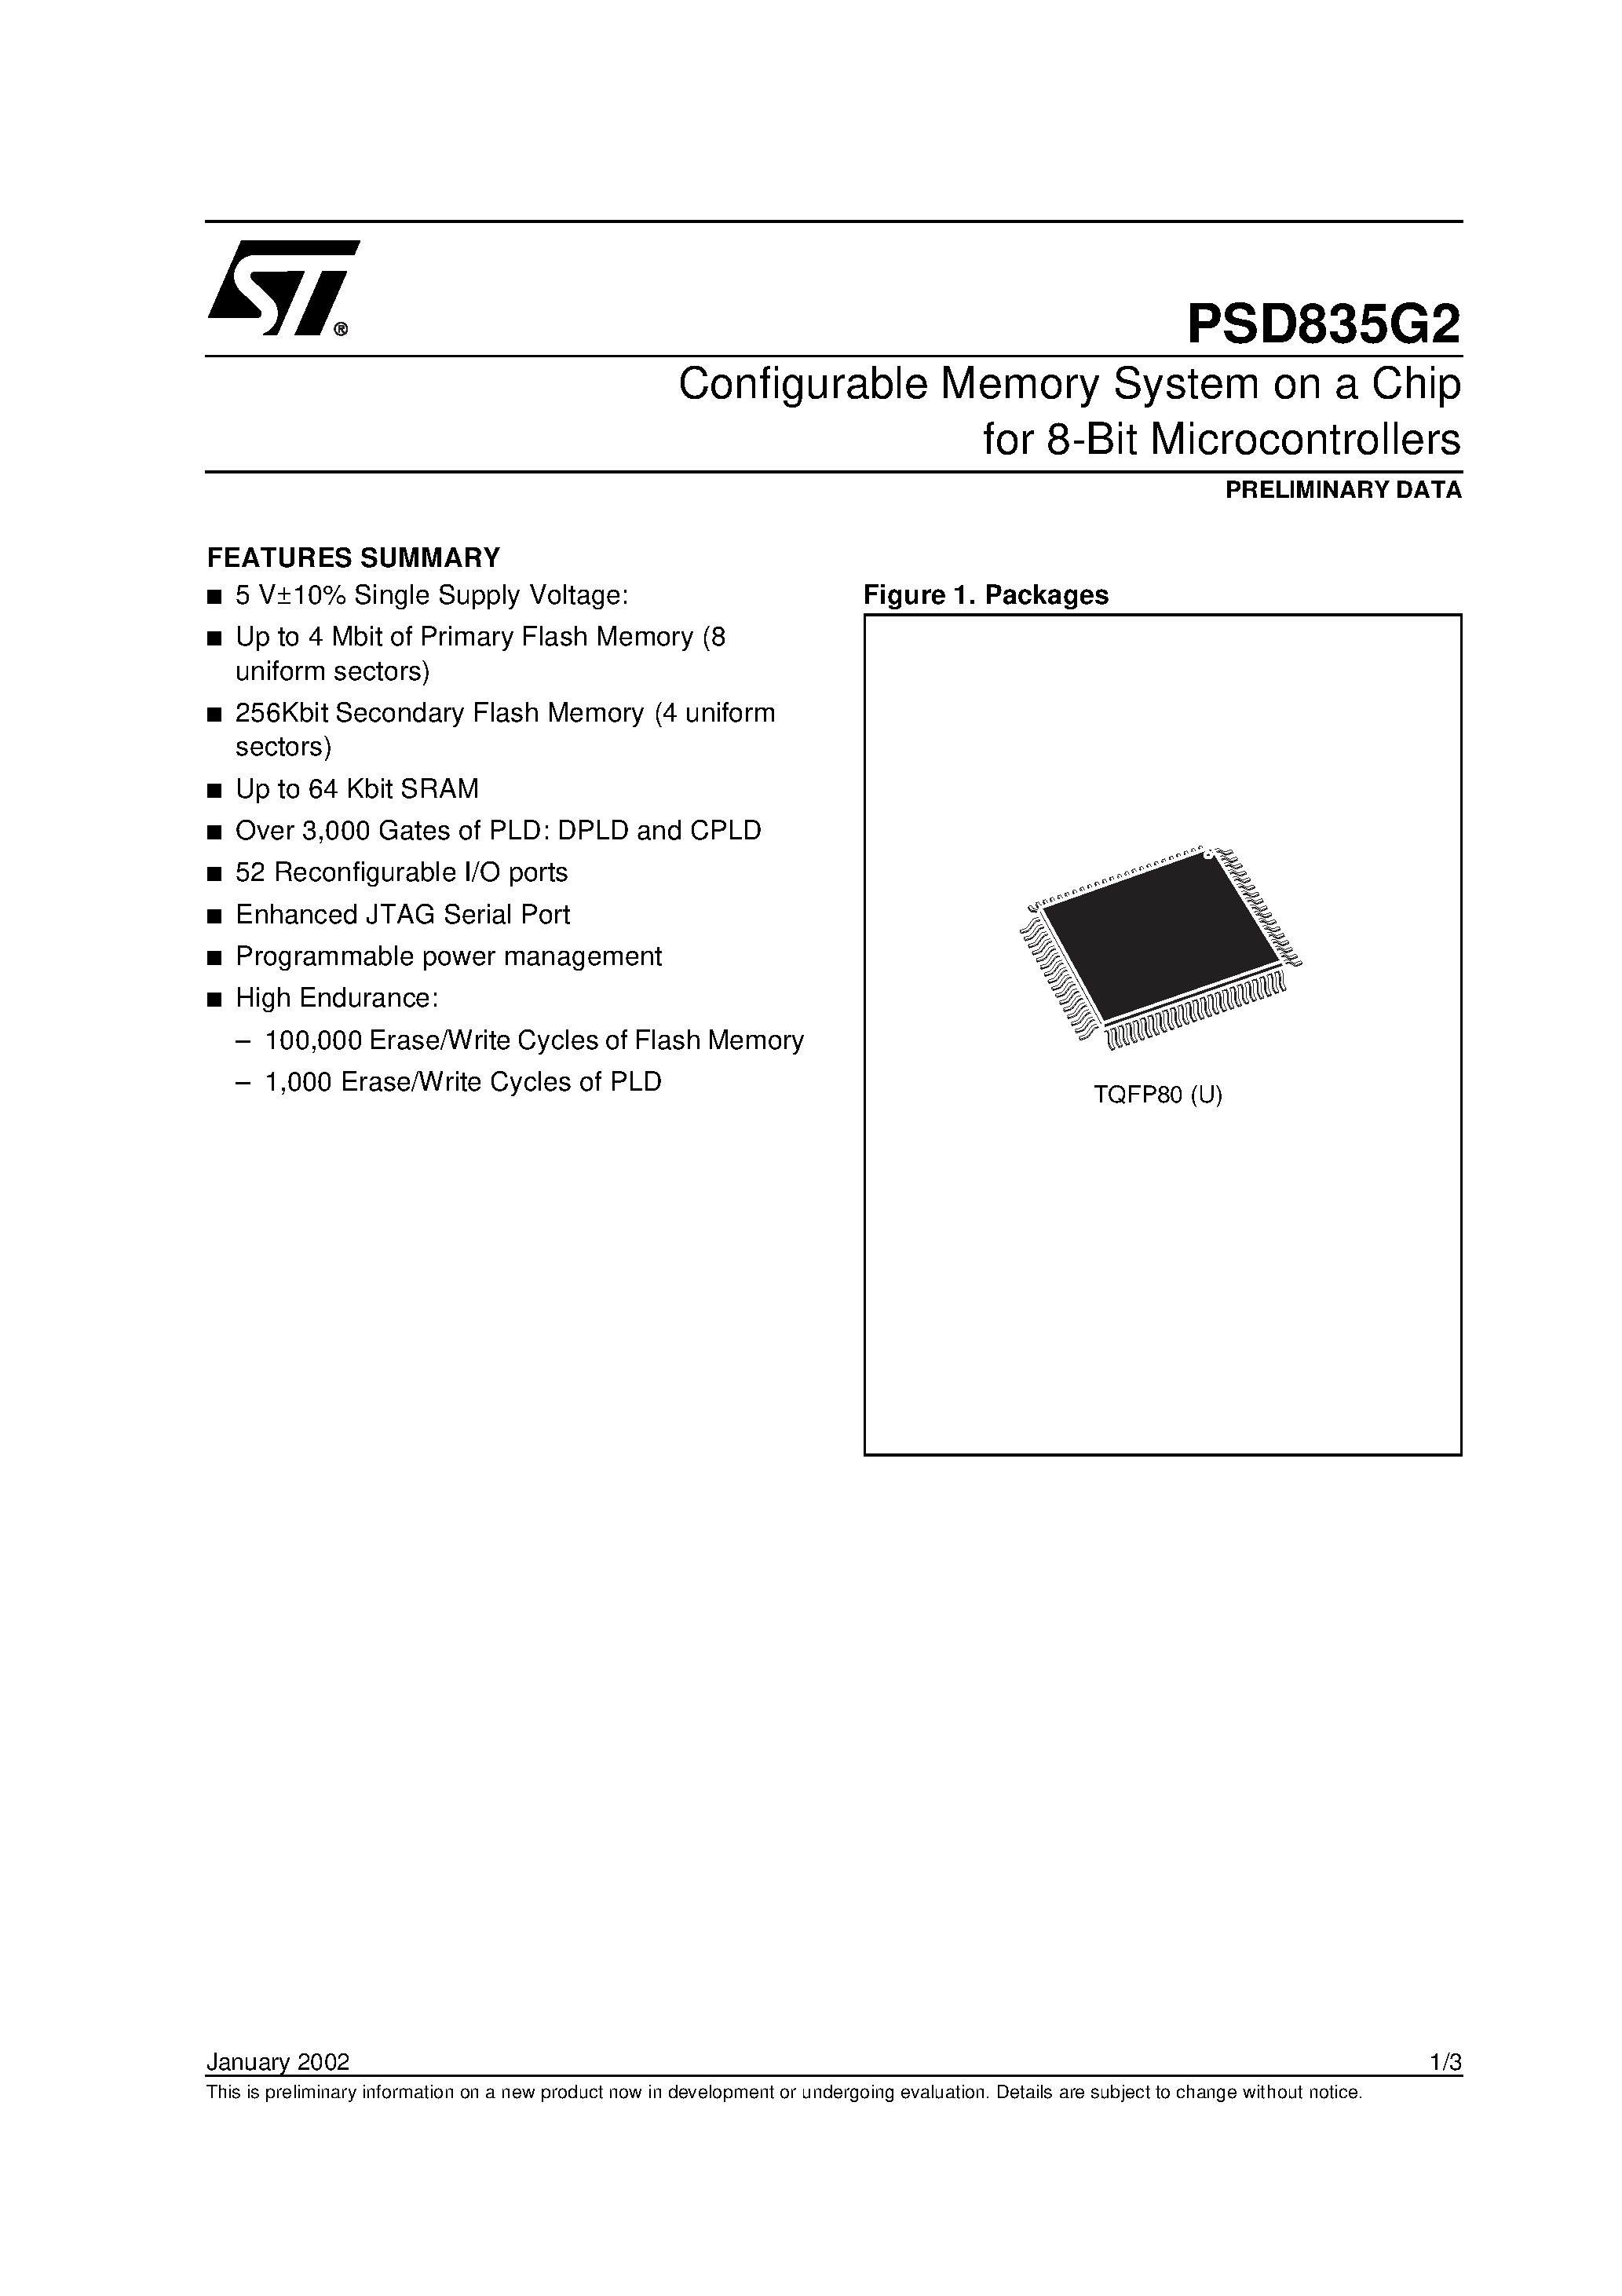 Datasheet PSD835F2V-A-15J - Configurable Memory System on a Chip for 8-Bit Microcontrollers page 1